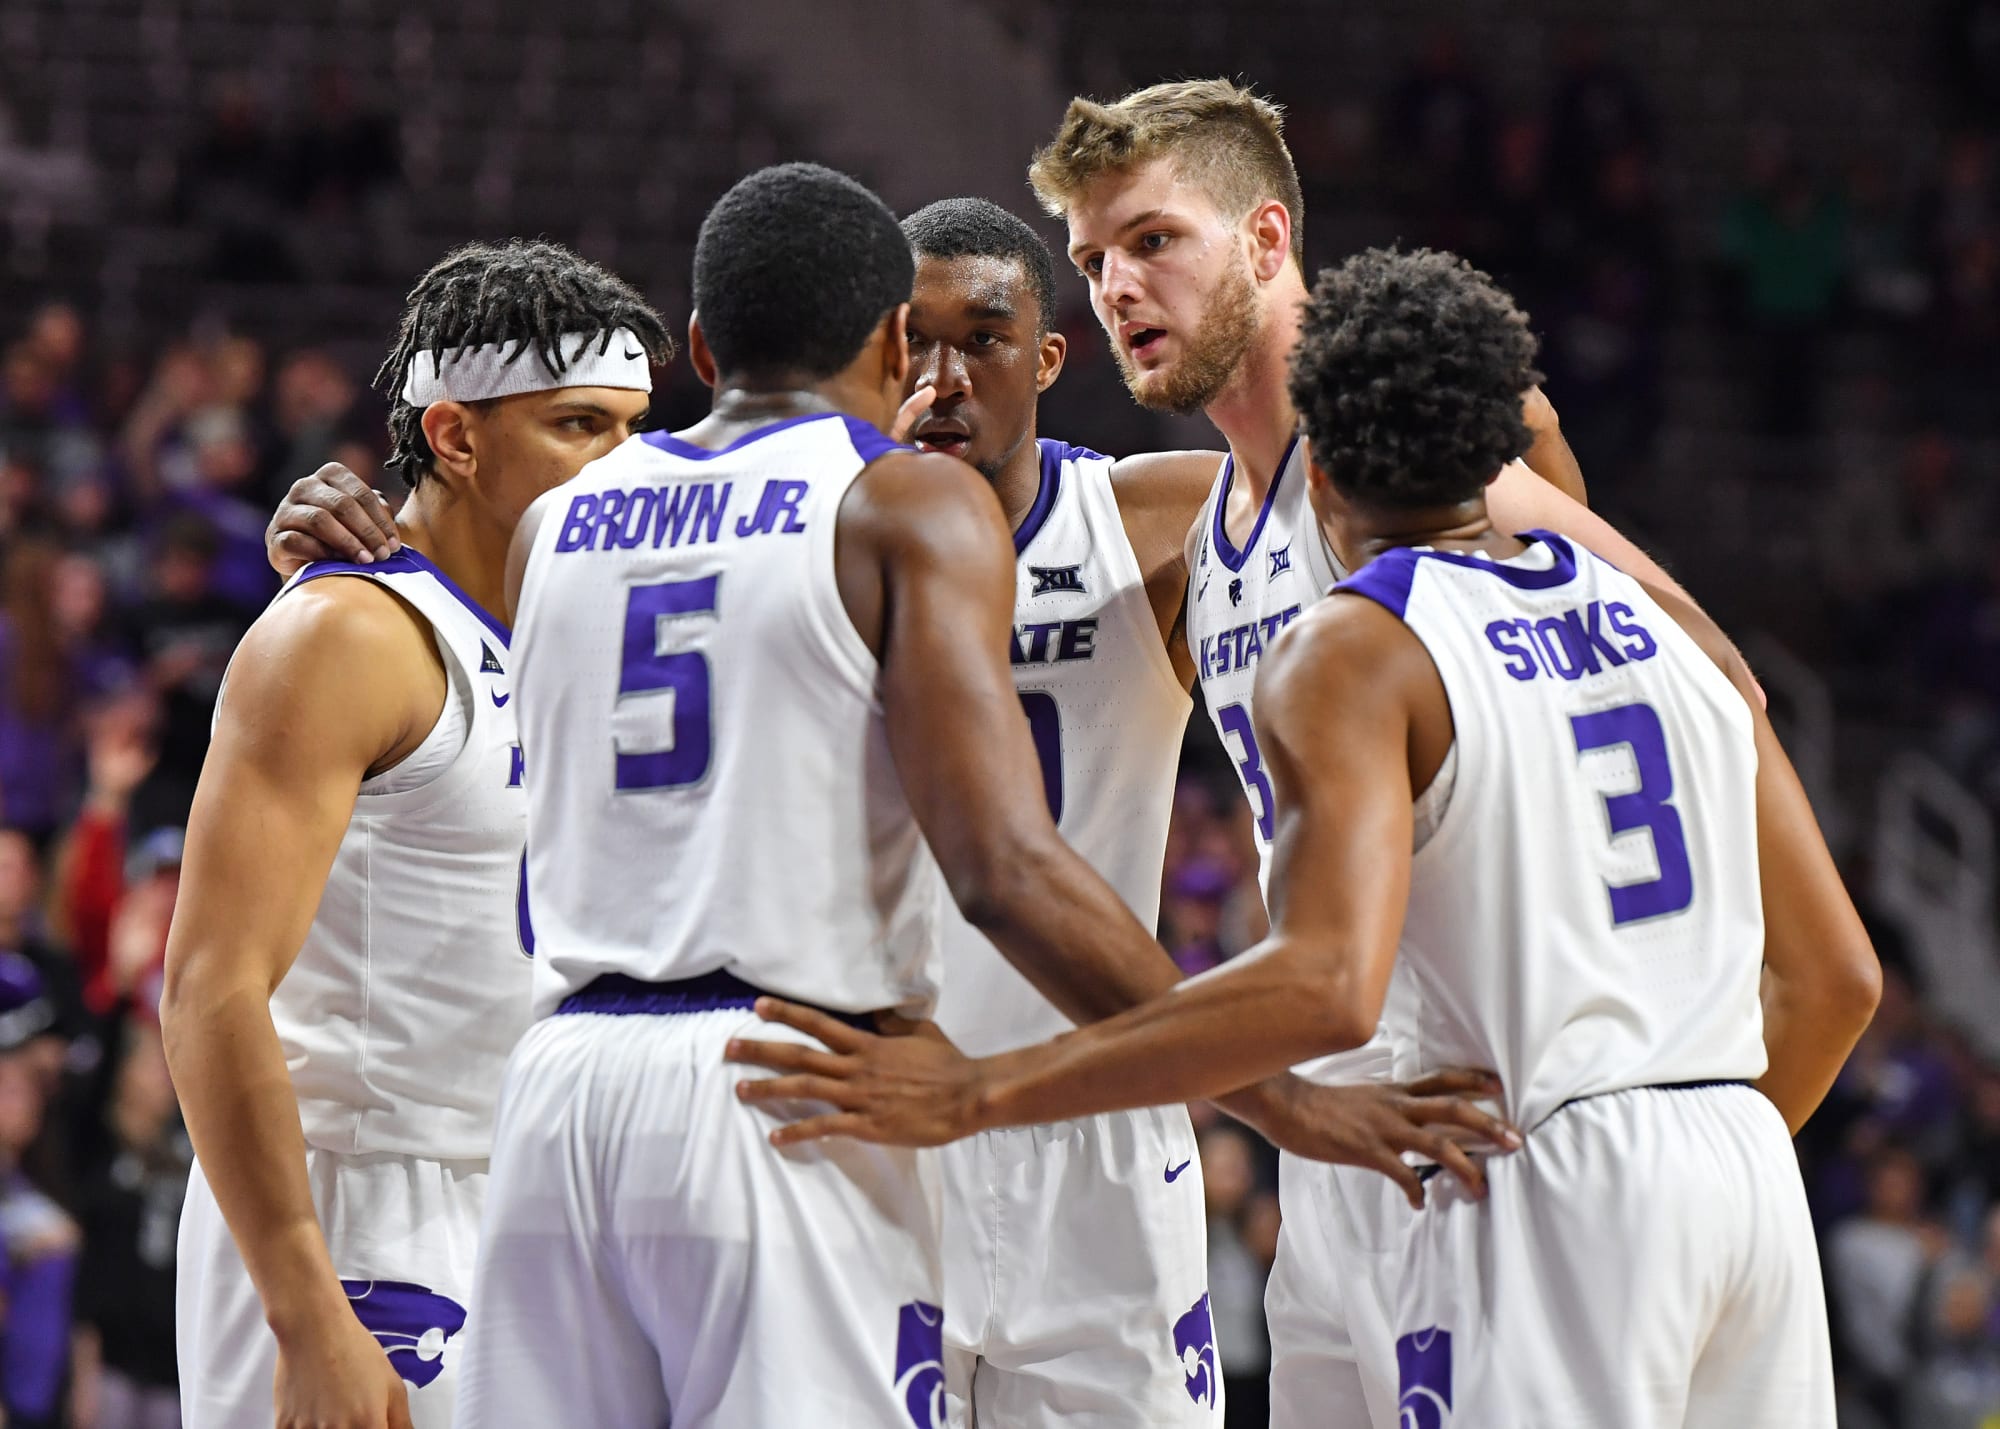 Kansas State Basketball needs to shoot better in nonconference play